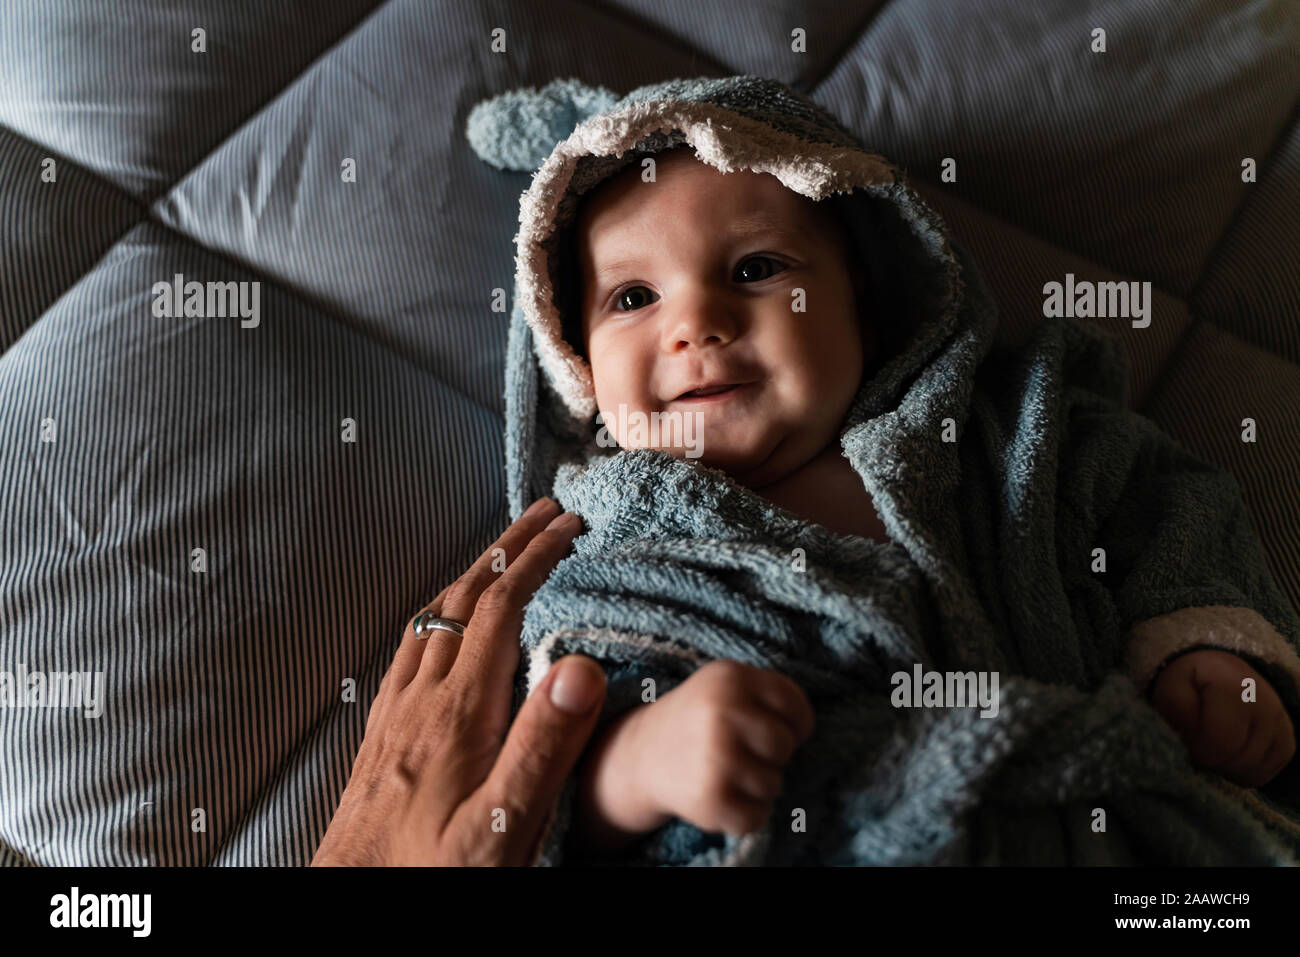 Portrait of baby girl lying on bed wrapped with shark shaped towel touched by mother's hand Stock Photo